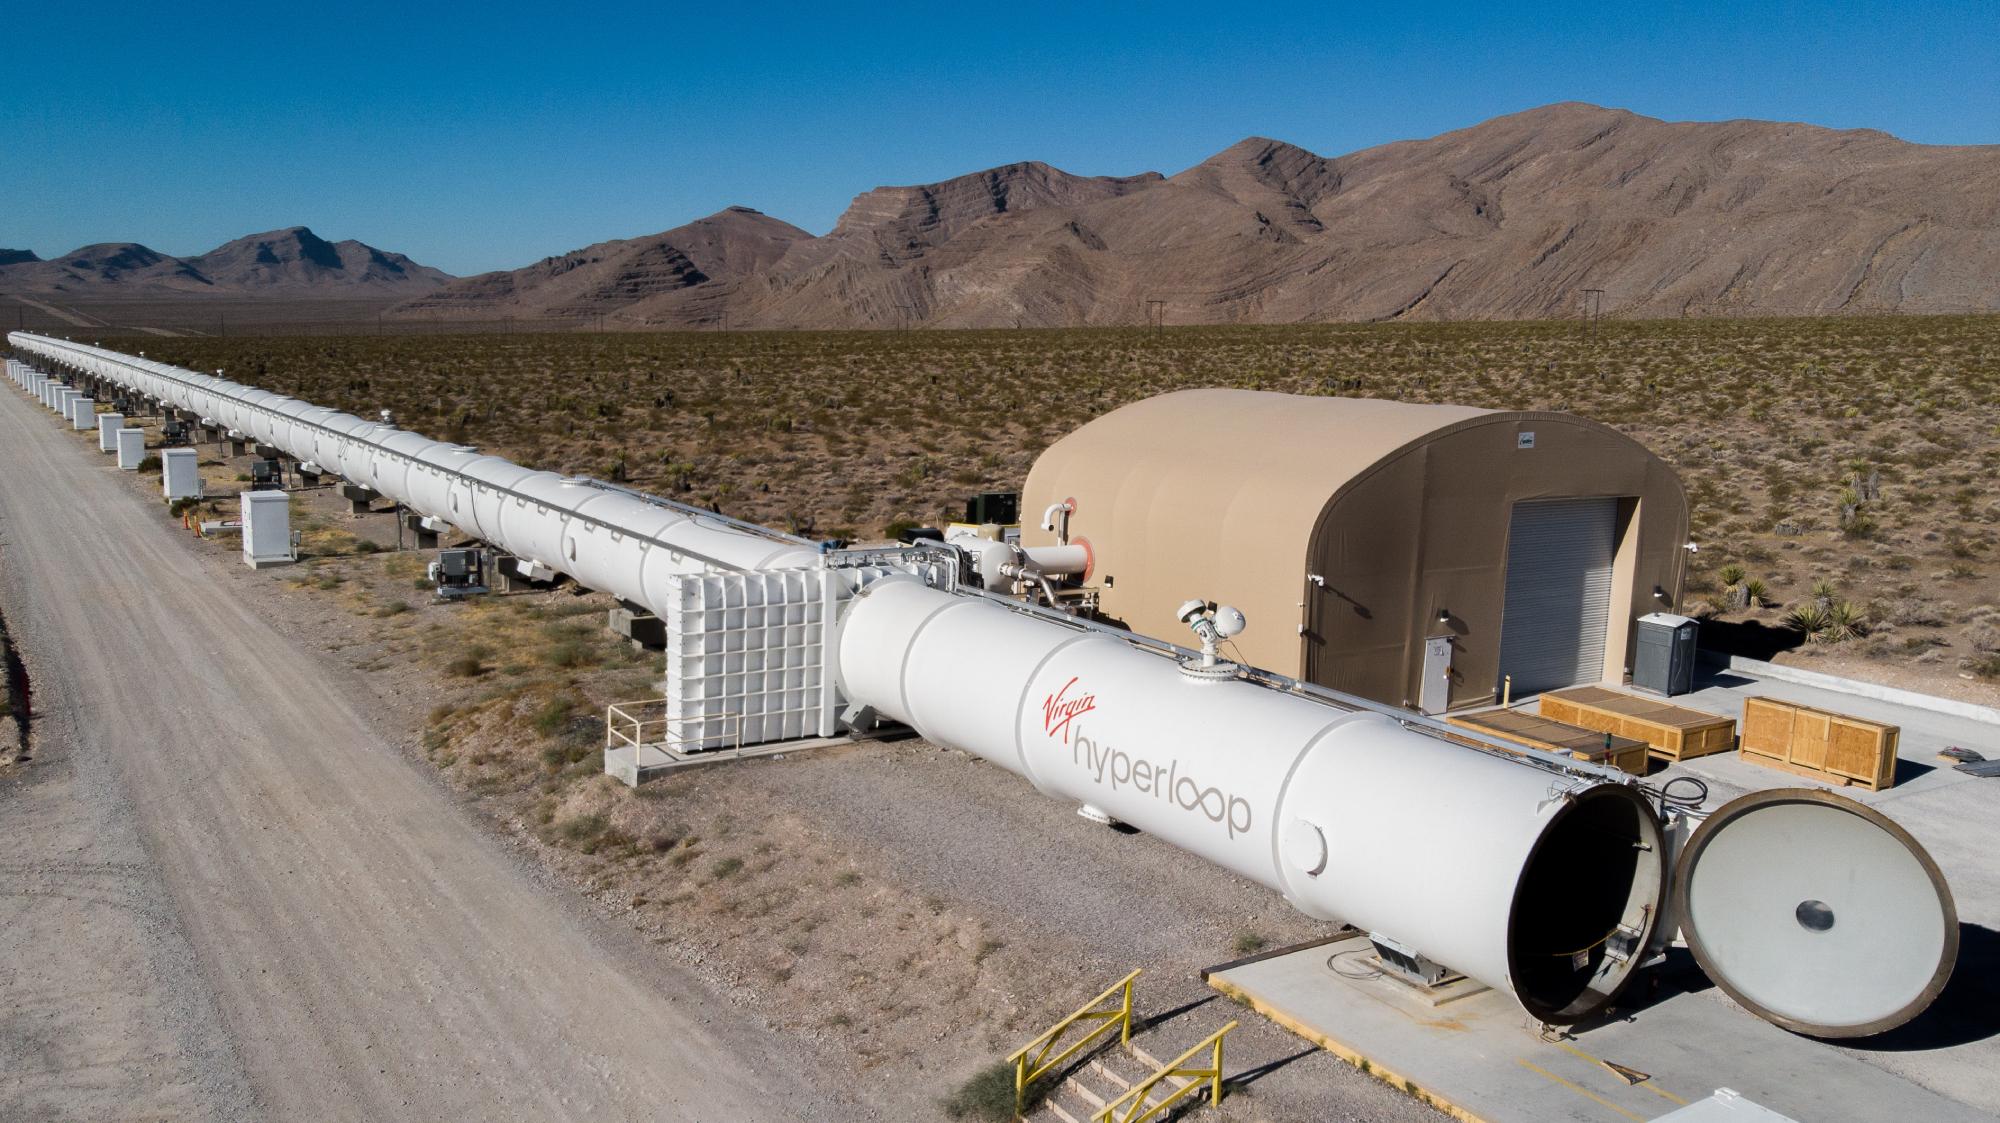 The Virgin Hyperloop is changing the way we think about transportation.